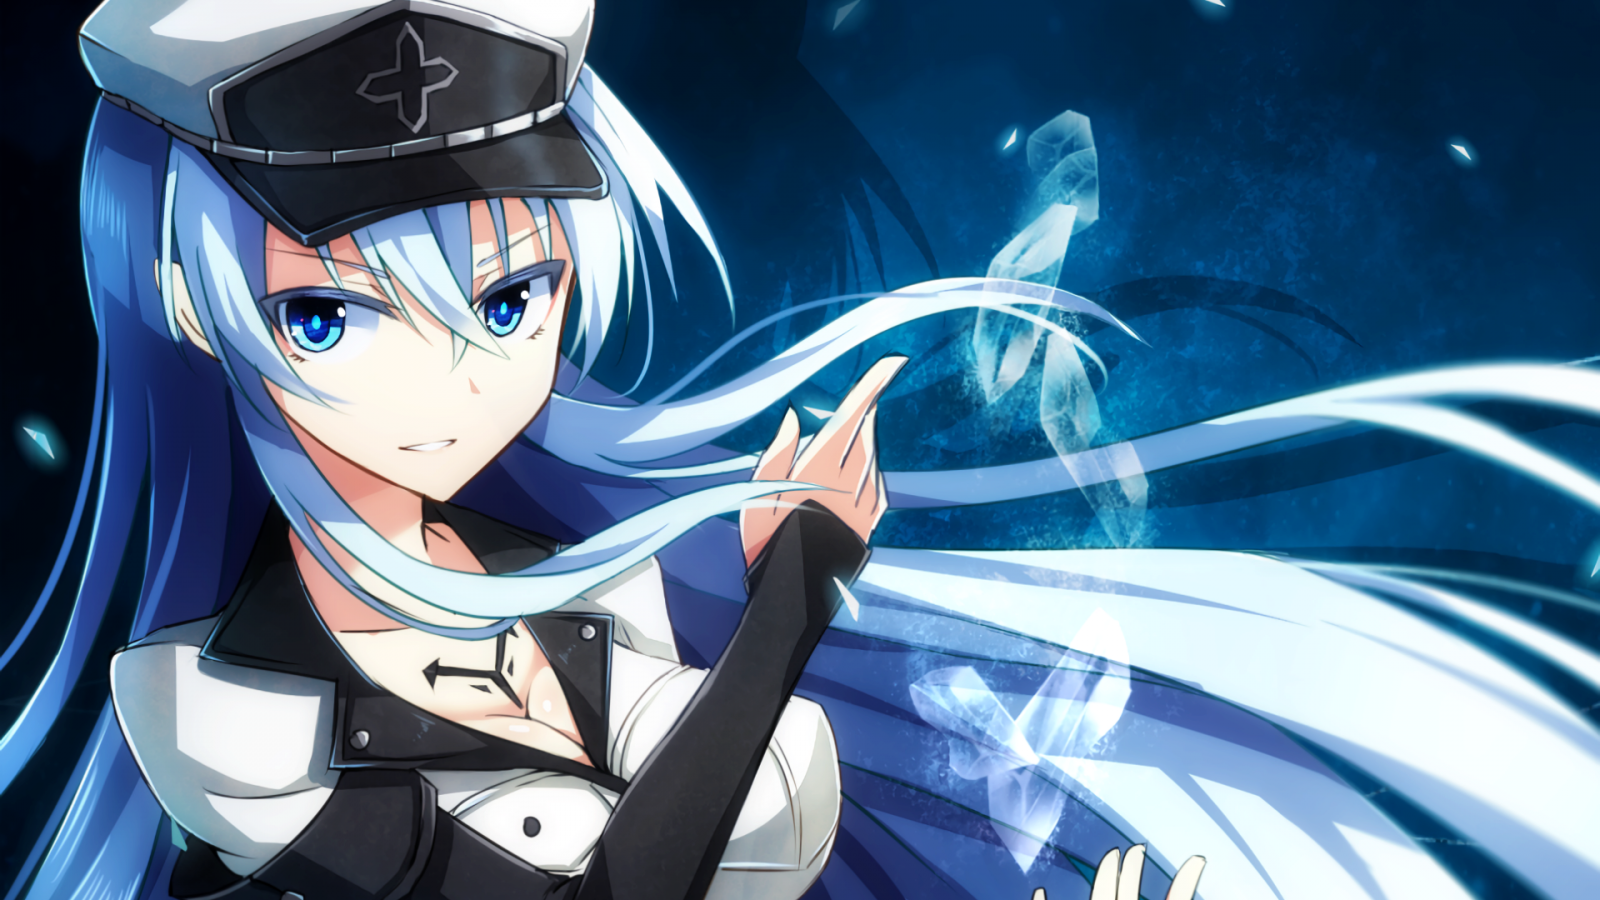 Esdeath - Akame Ga Kill Wallpaper Done By Me Rendered by MG Anime